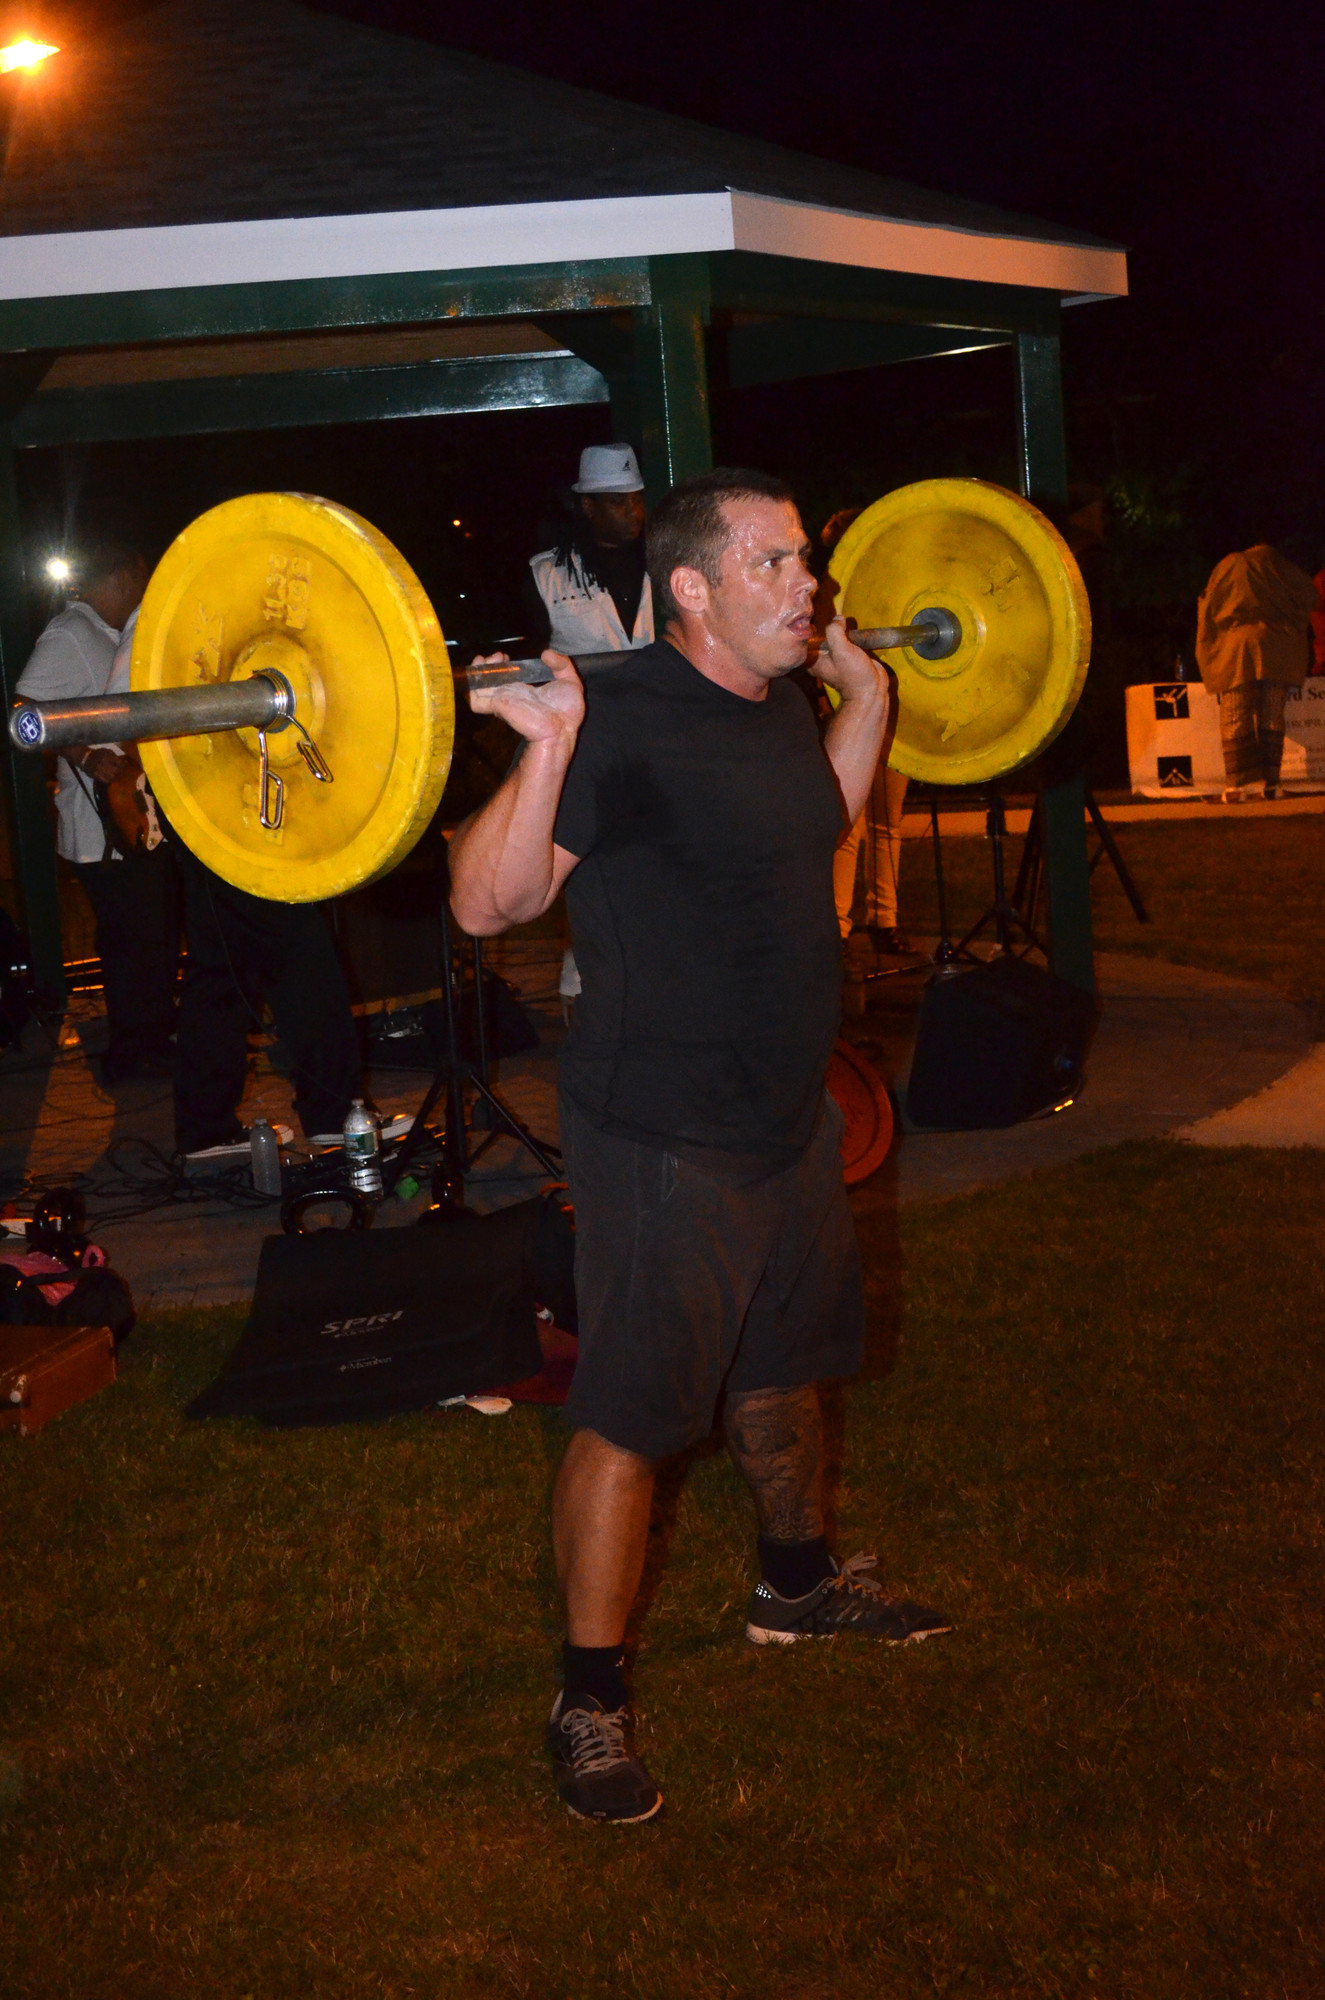 Jimmy Drakopoulos lifting weights at the event.